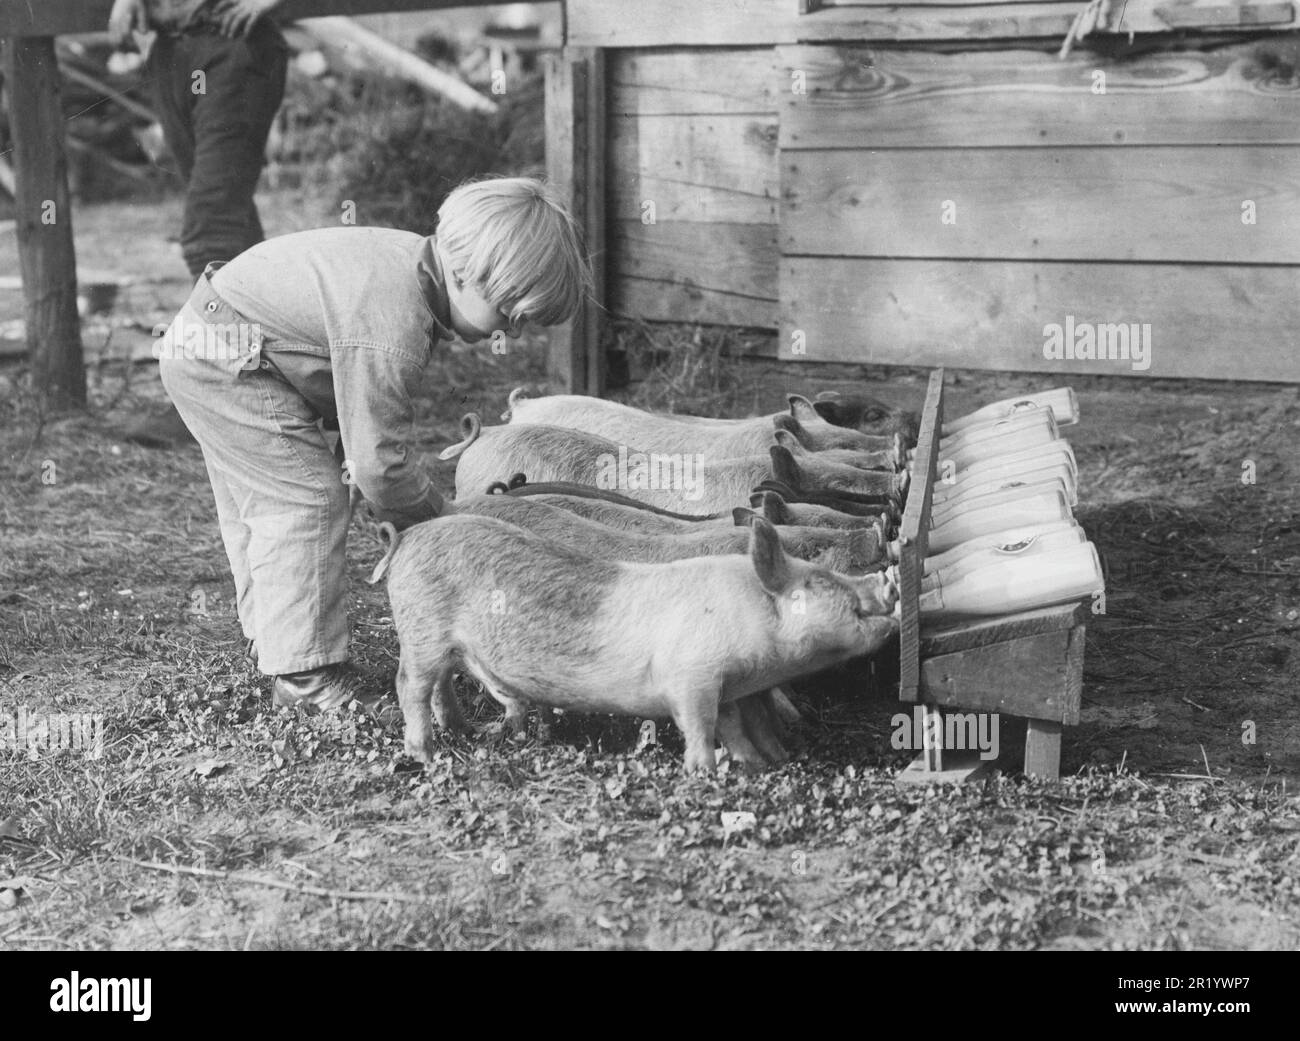 In the 1930s. A child is arranging the piglets so that each has it's own milk bottle and stands in perfect order when eating. Sweden 1930s Stock Photo